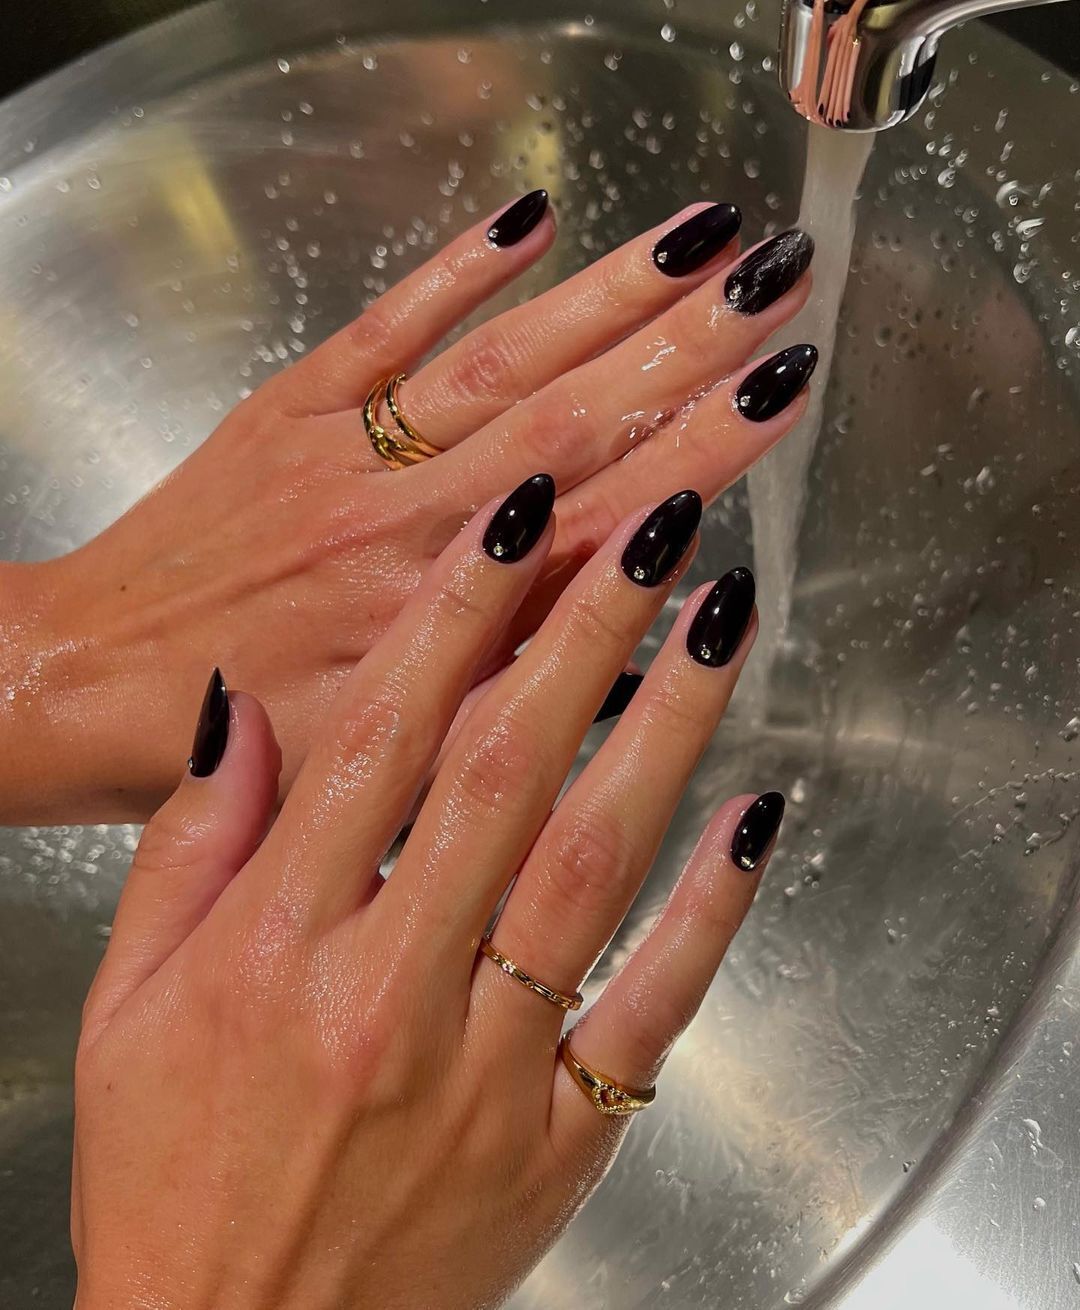 Acrylic vs. gel nails: which is better and what are the main differences 